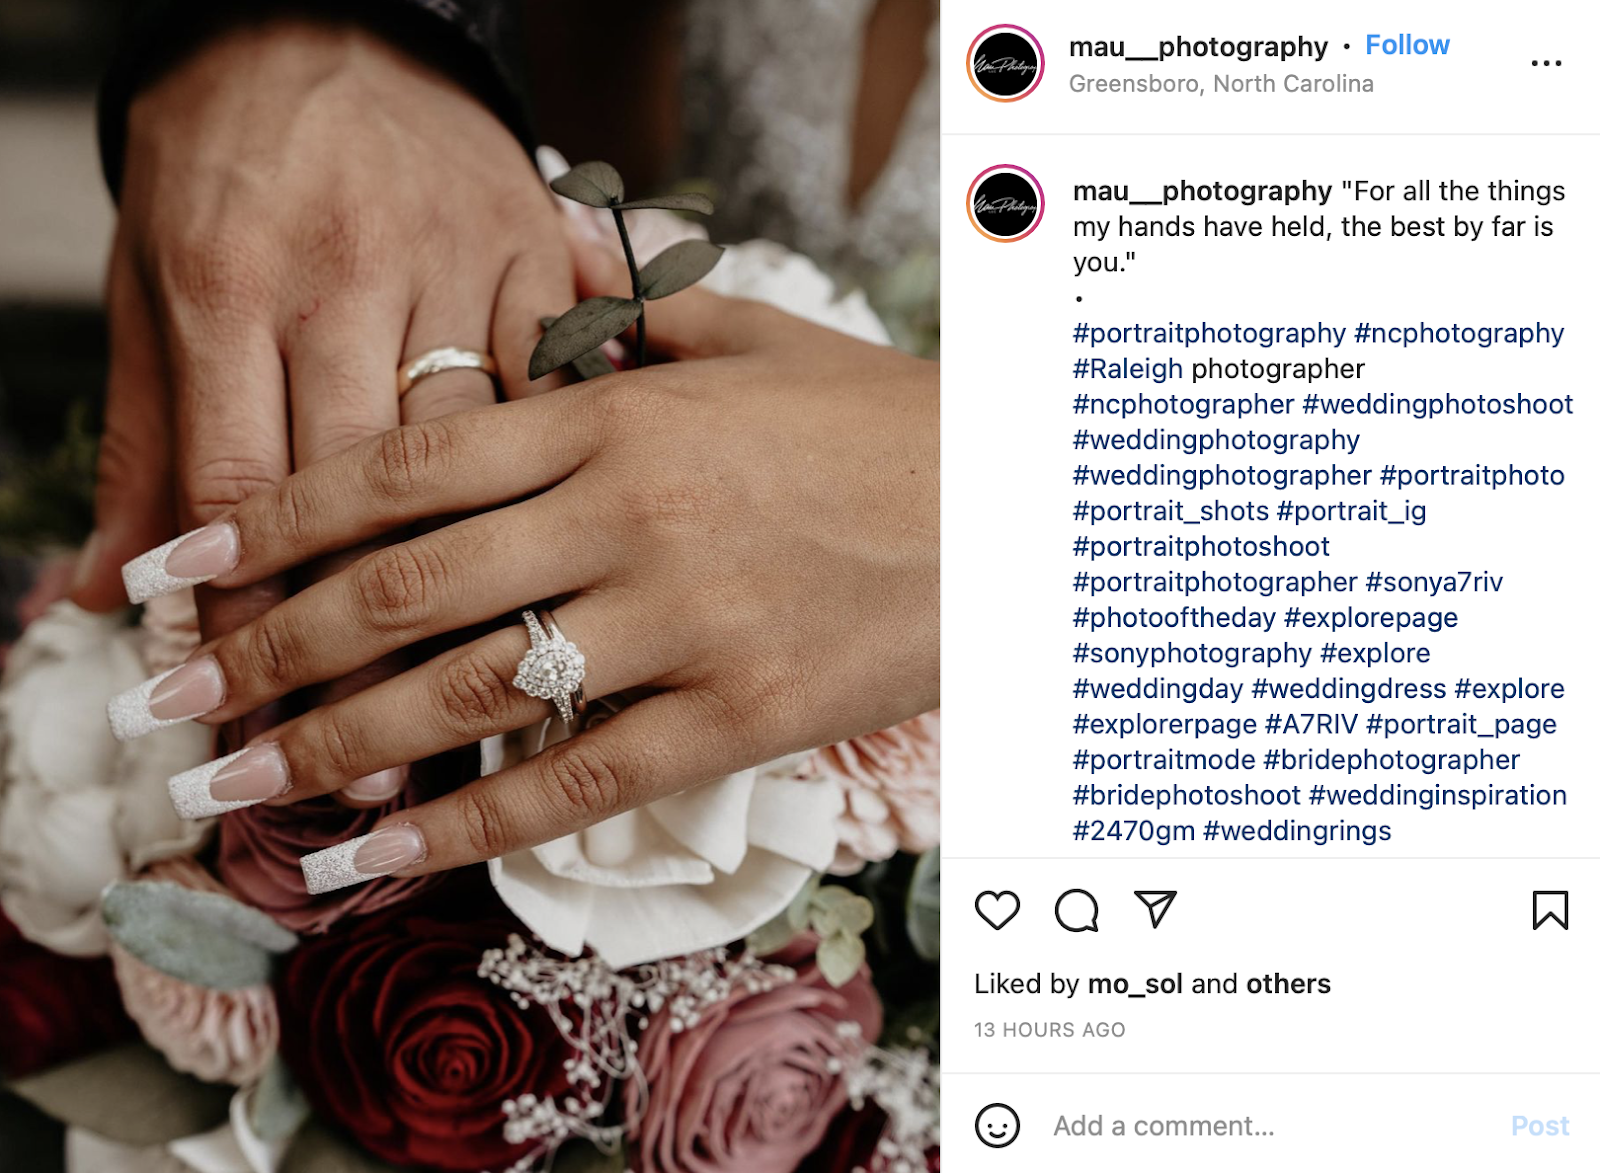 Instagram photo of wedding ring bands on hands